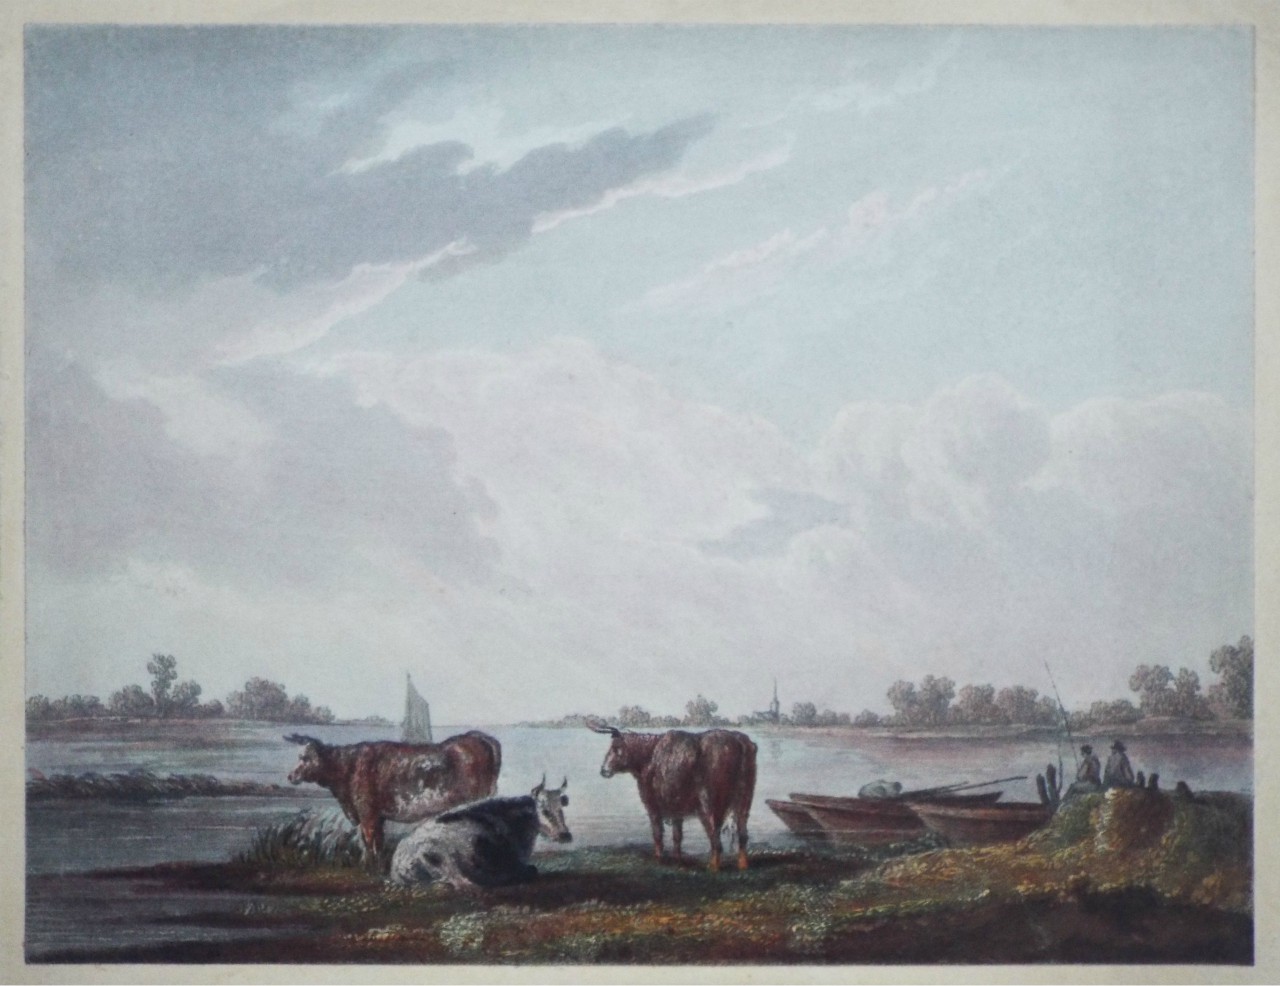 Aquatint - No. 7. - From the Original by Cuyp, in the Dulwich Gallery.